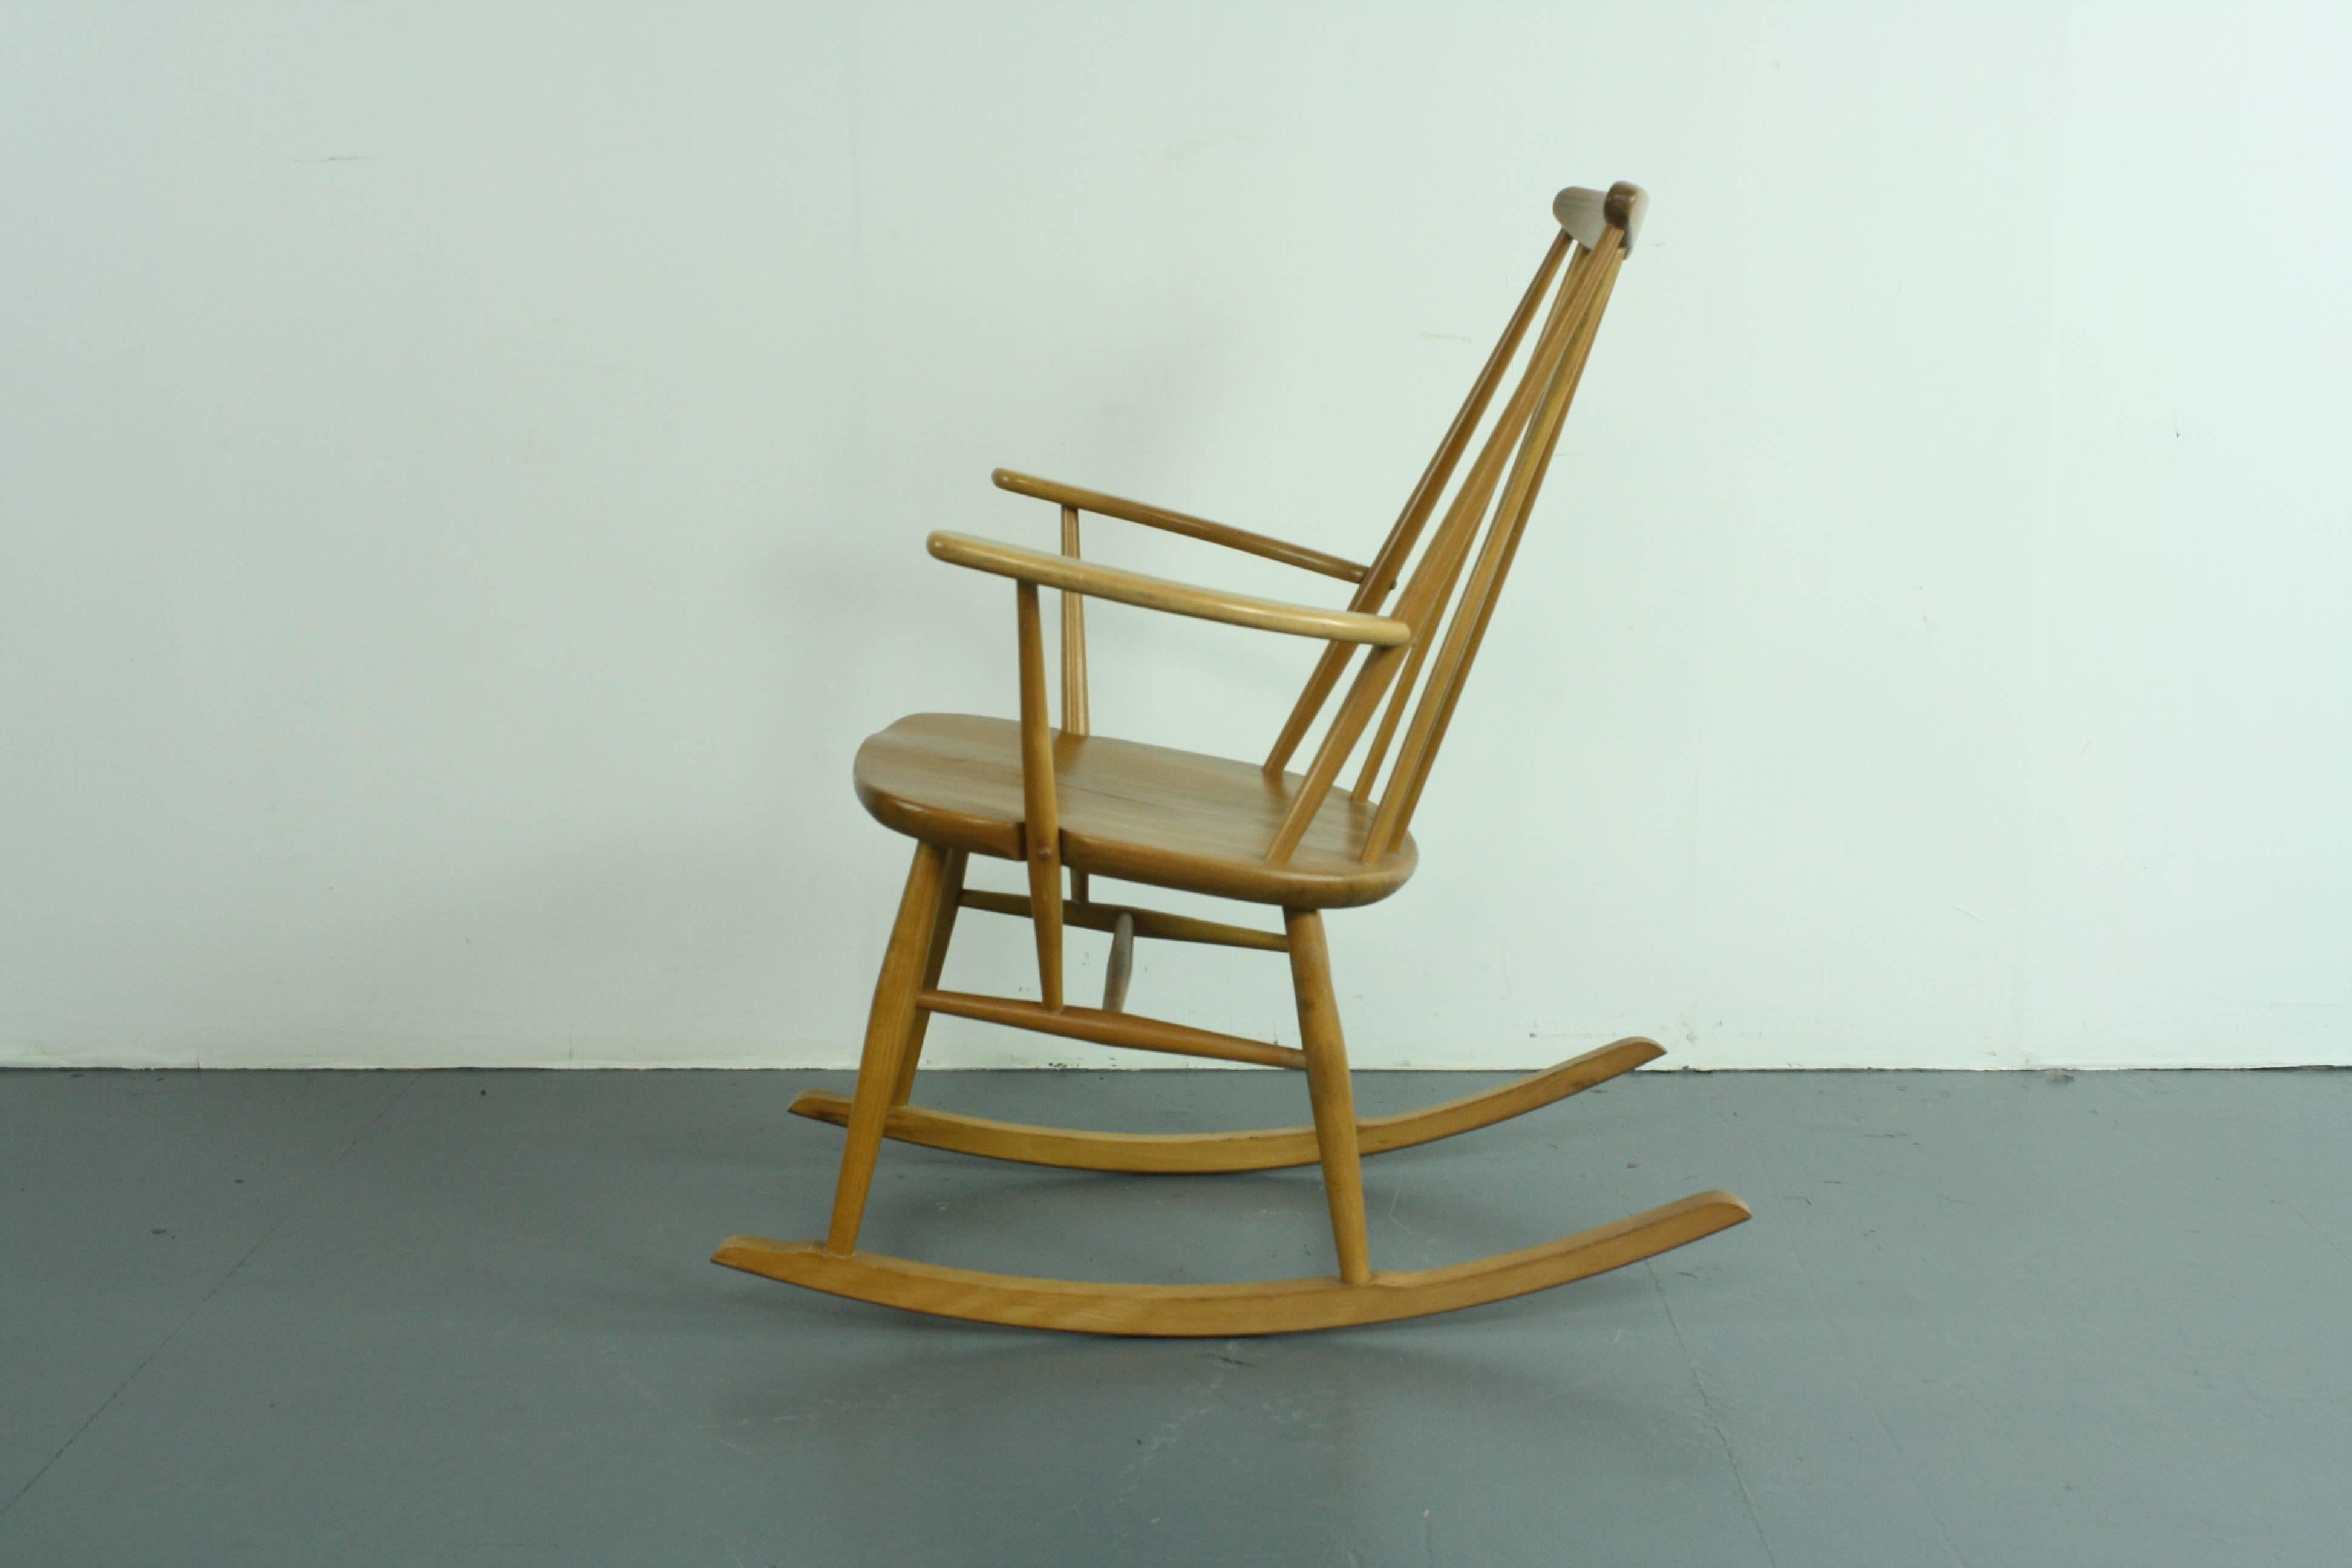 Vintage Midcentury Ercol Rocking Chair In Good Condition For Sale In Lewes, East Sussex